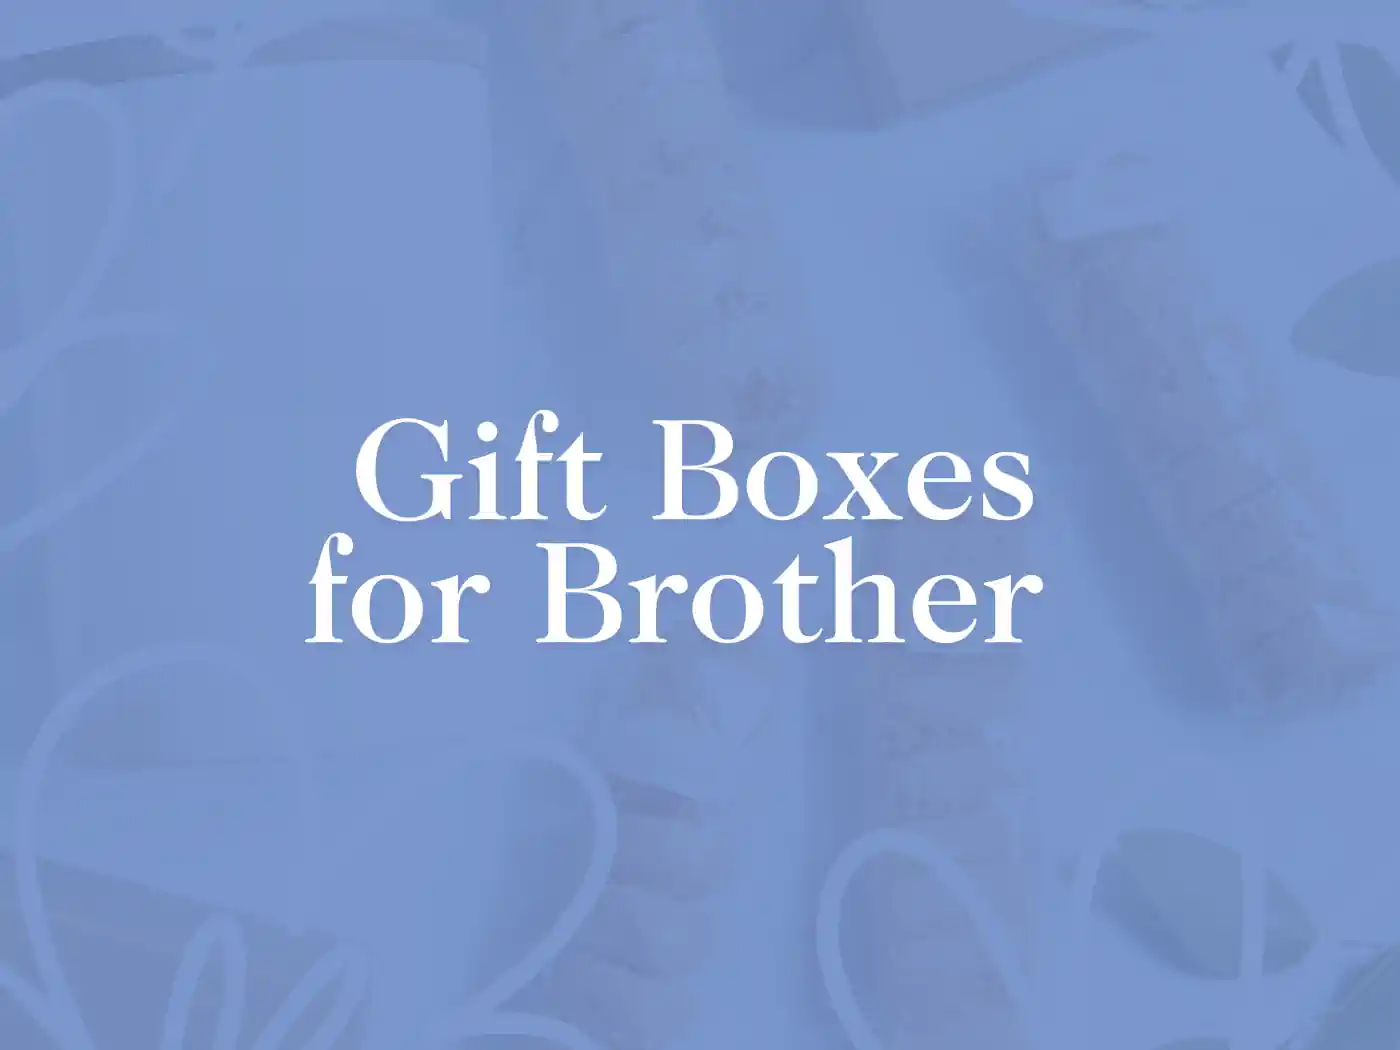 A promotional image displaying the text 'Gift Boxes for Brother' against a background of gift items and decorations, emphasizing thoughtful and curated gifting options. Fabulous Flowers and Gifts.